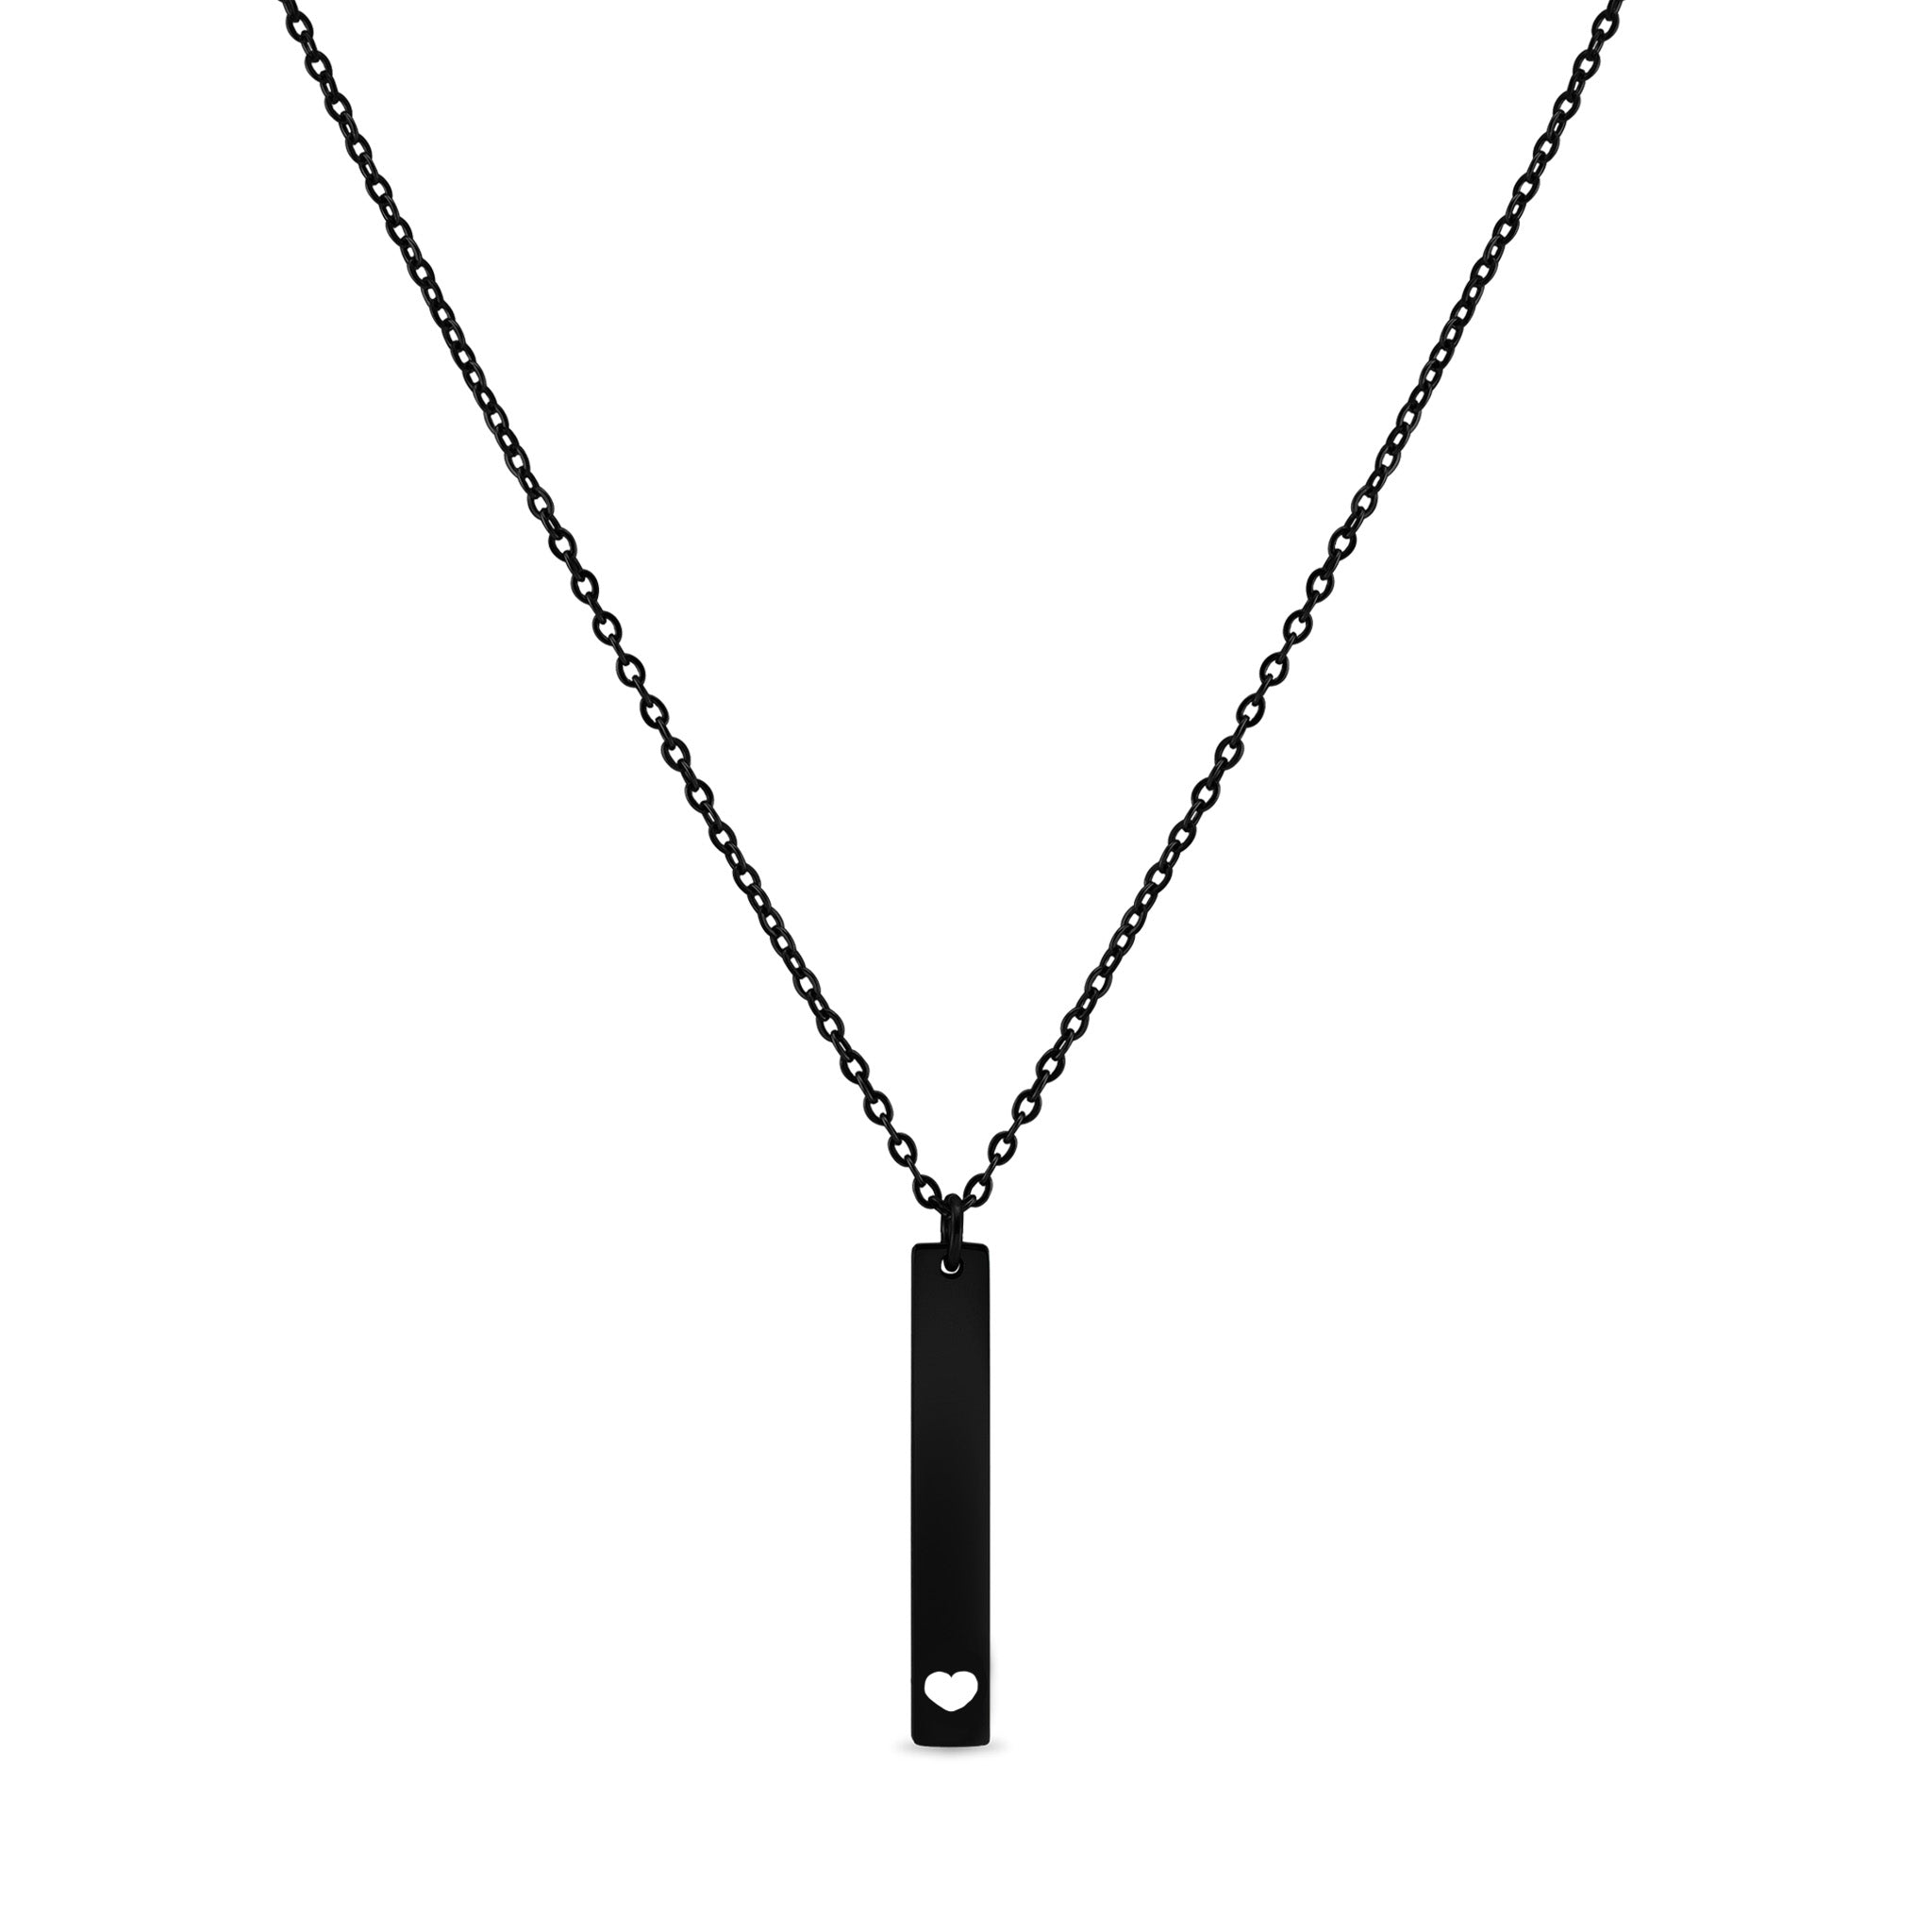 886 Royal Mint Sterling Silver Bar Pendant Belcher Chain Necklace - Small  JLBPC-0S0 | Mappin and Webb